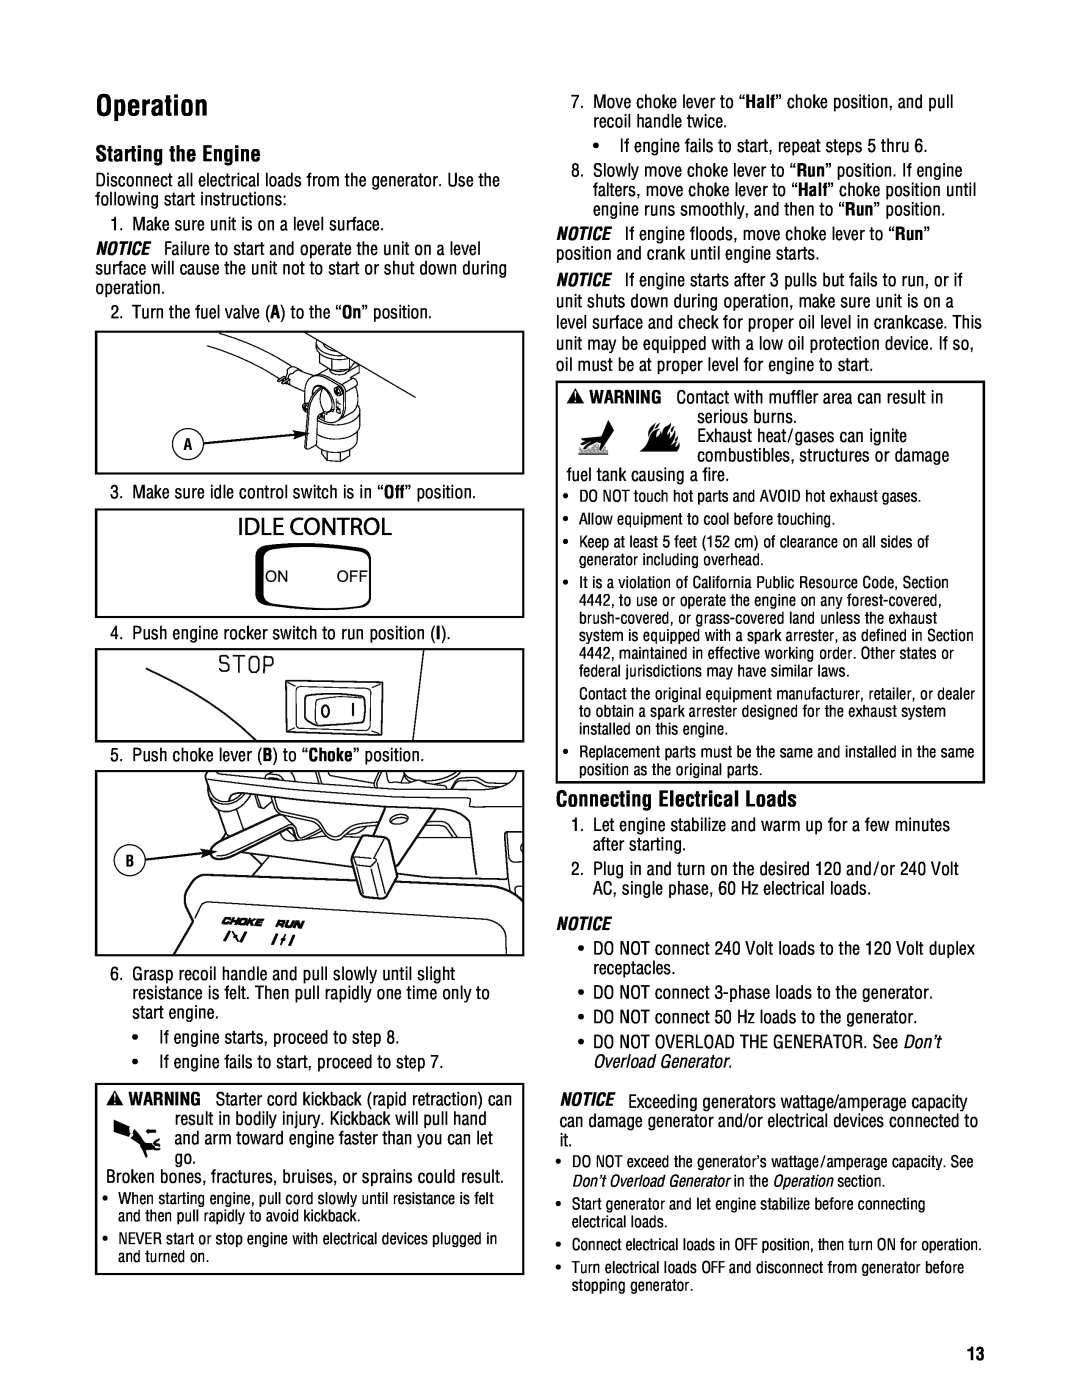 Briggs & Stratton PRO4000 manual Operation, Starting the Engine, Connecting Electrical Loads 